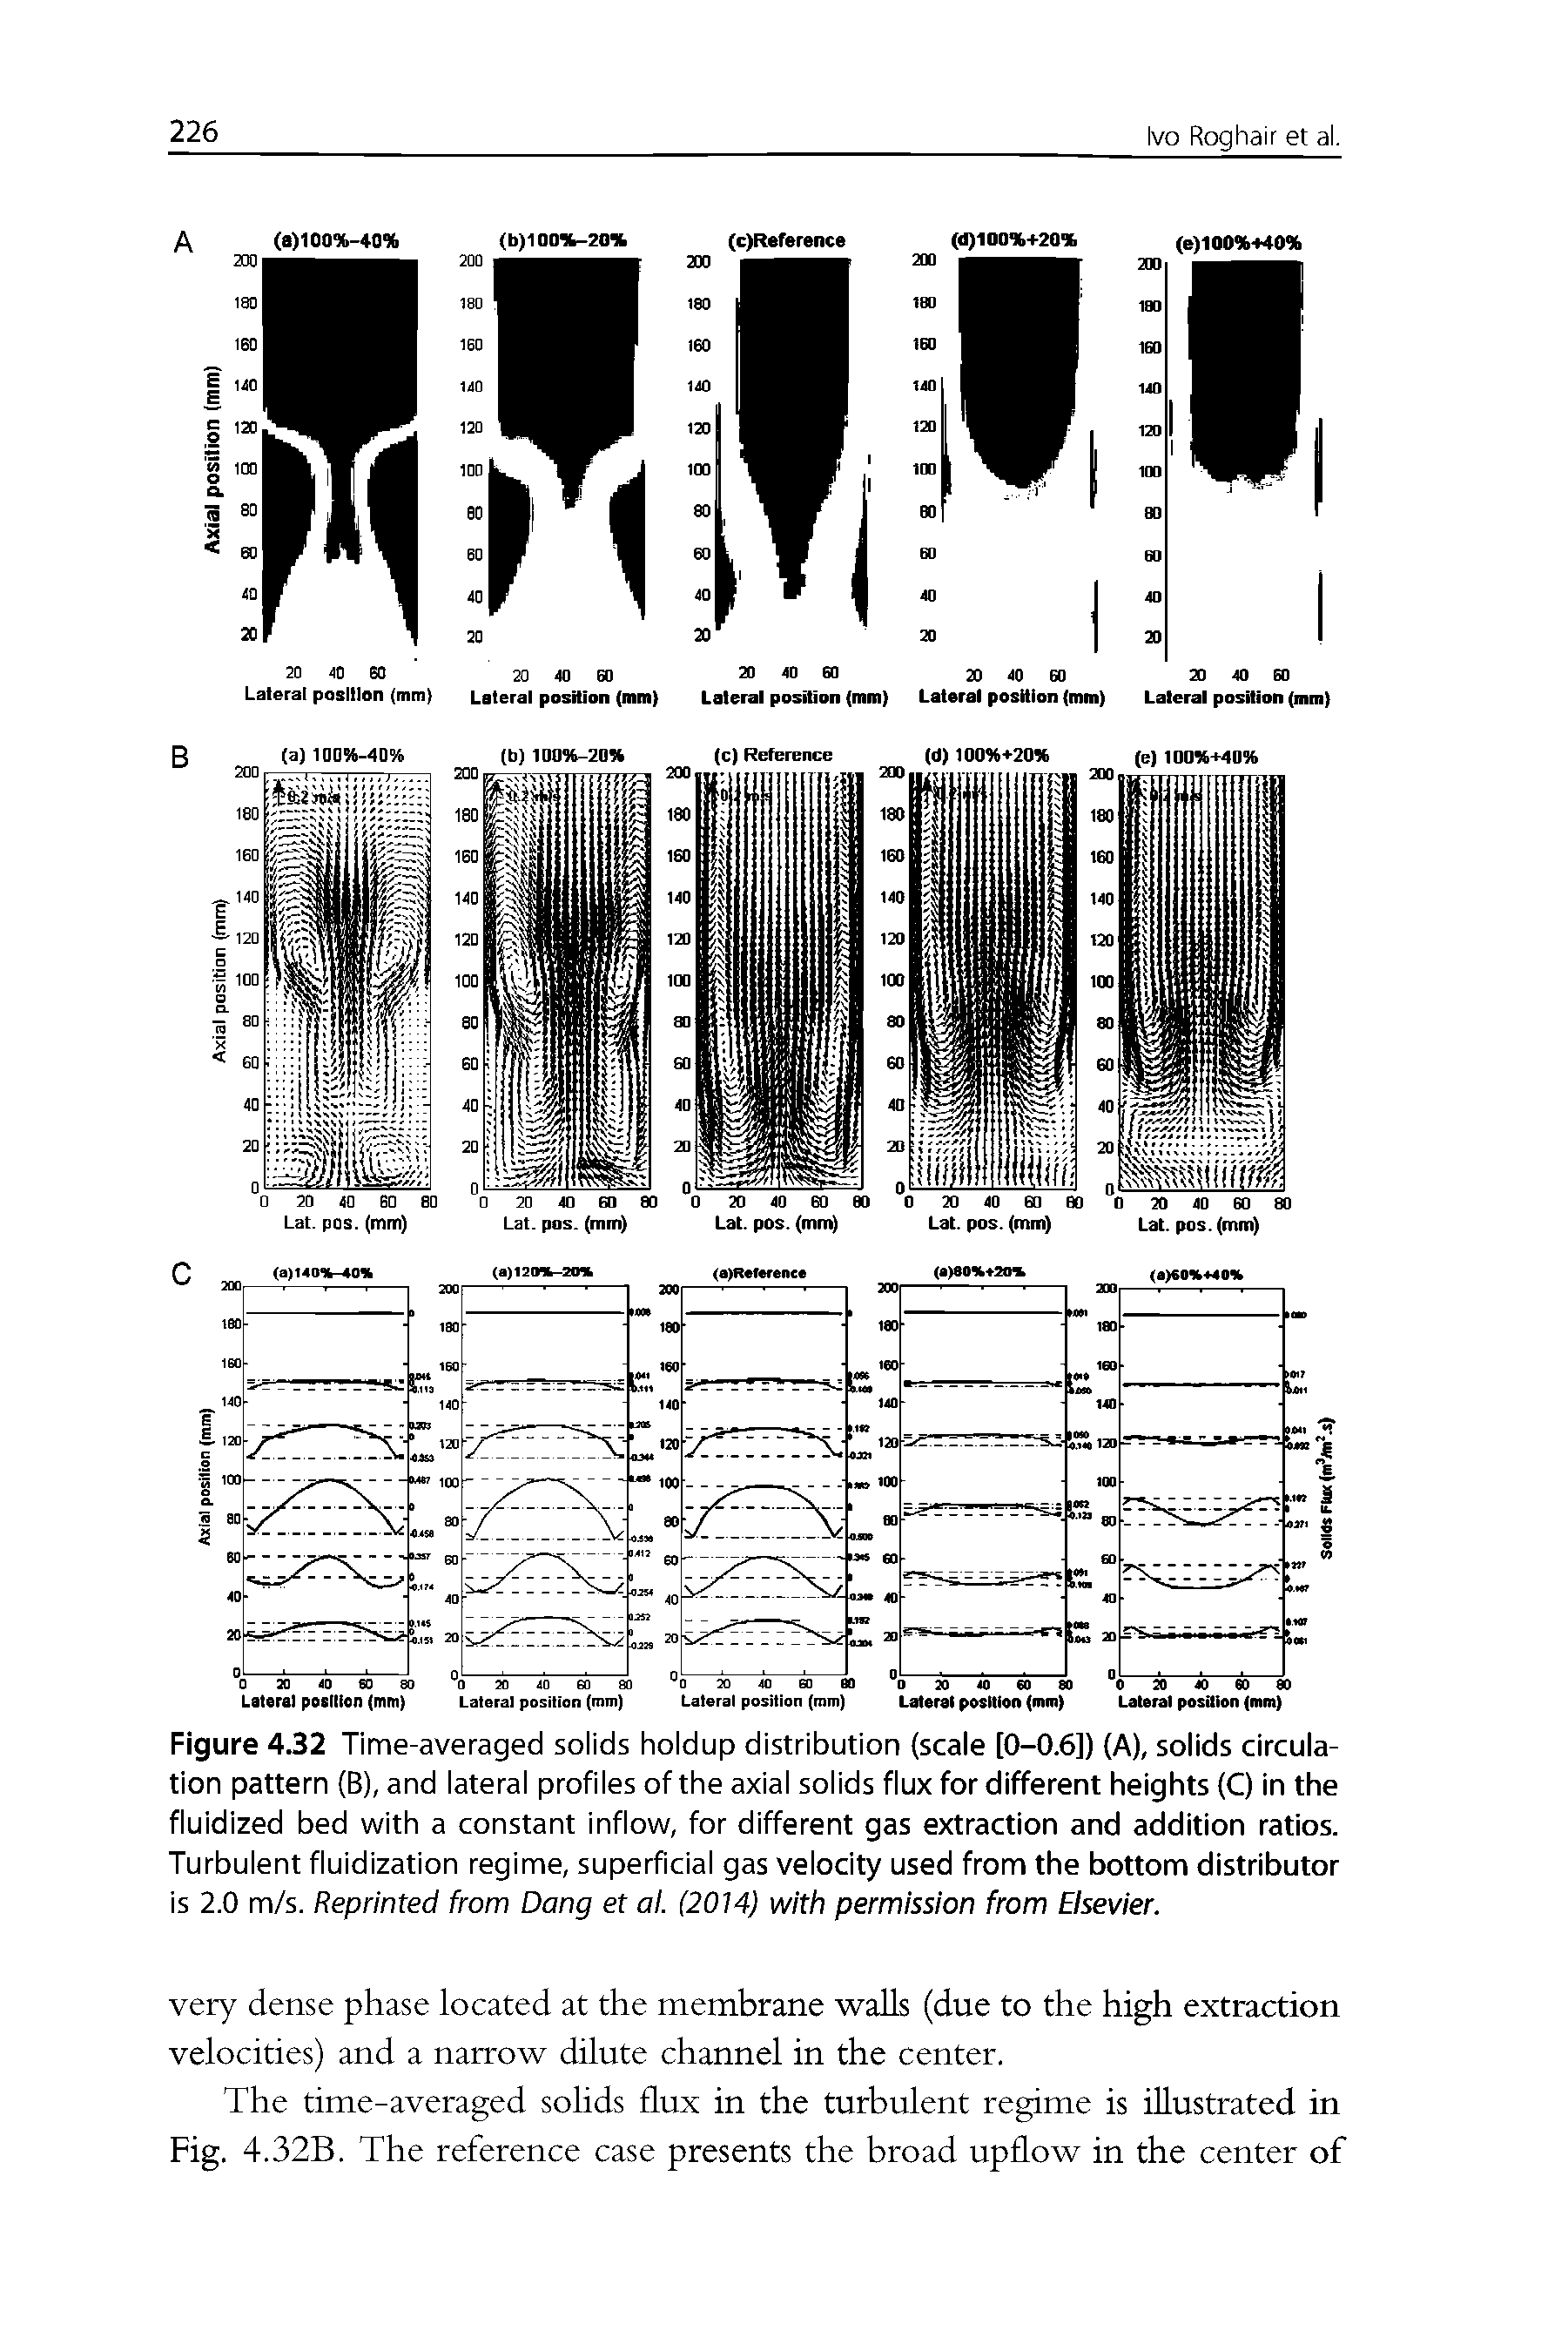 Figure 432 Time-averaged solids holdup distribution (scale [0-0.6]) (A), solids circulation pattern (B), and lateral profiles of the axial solids flux for different heights (C) in the fluidized bed with a constant inflow, for different gas extraction and addition ratios. Turbulent fluidization regime, superficial gas velocity used from the bottom distributor is 2.0 m/s. Reprinted from Dang et al. (2014) with permission from Elsevier.